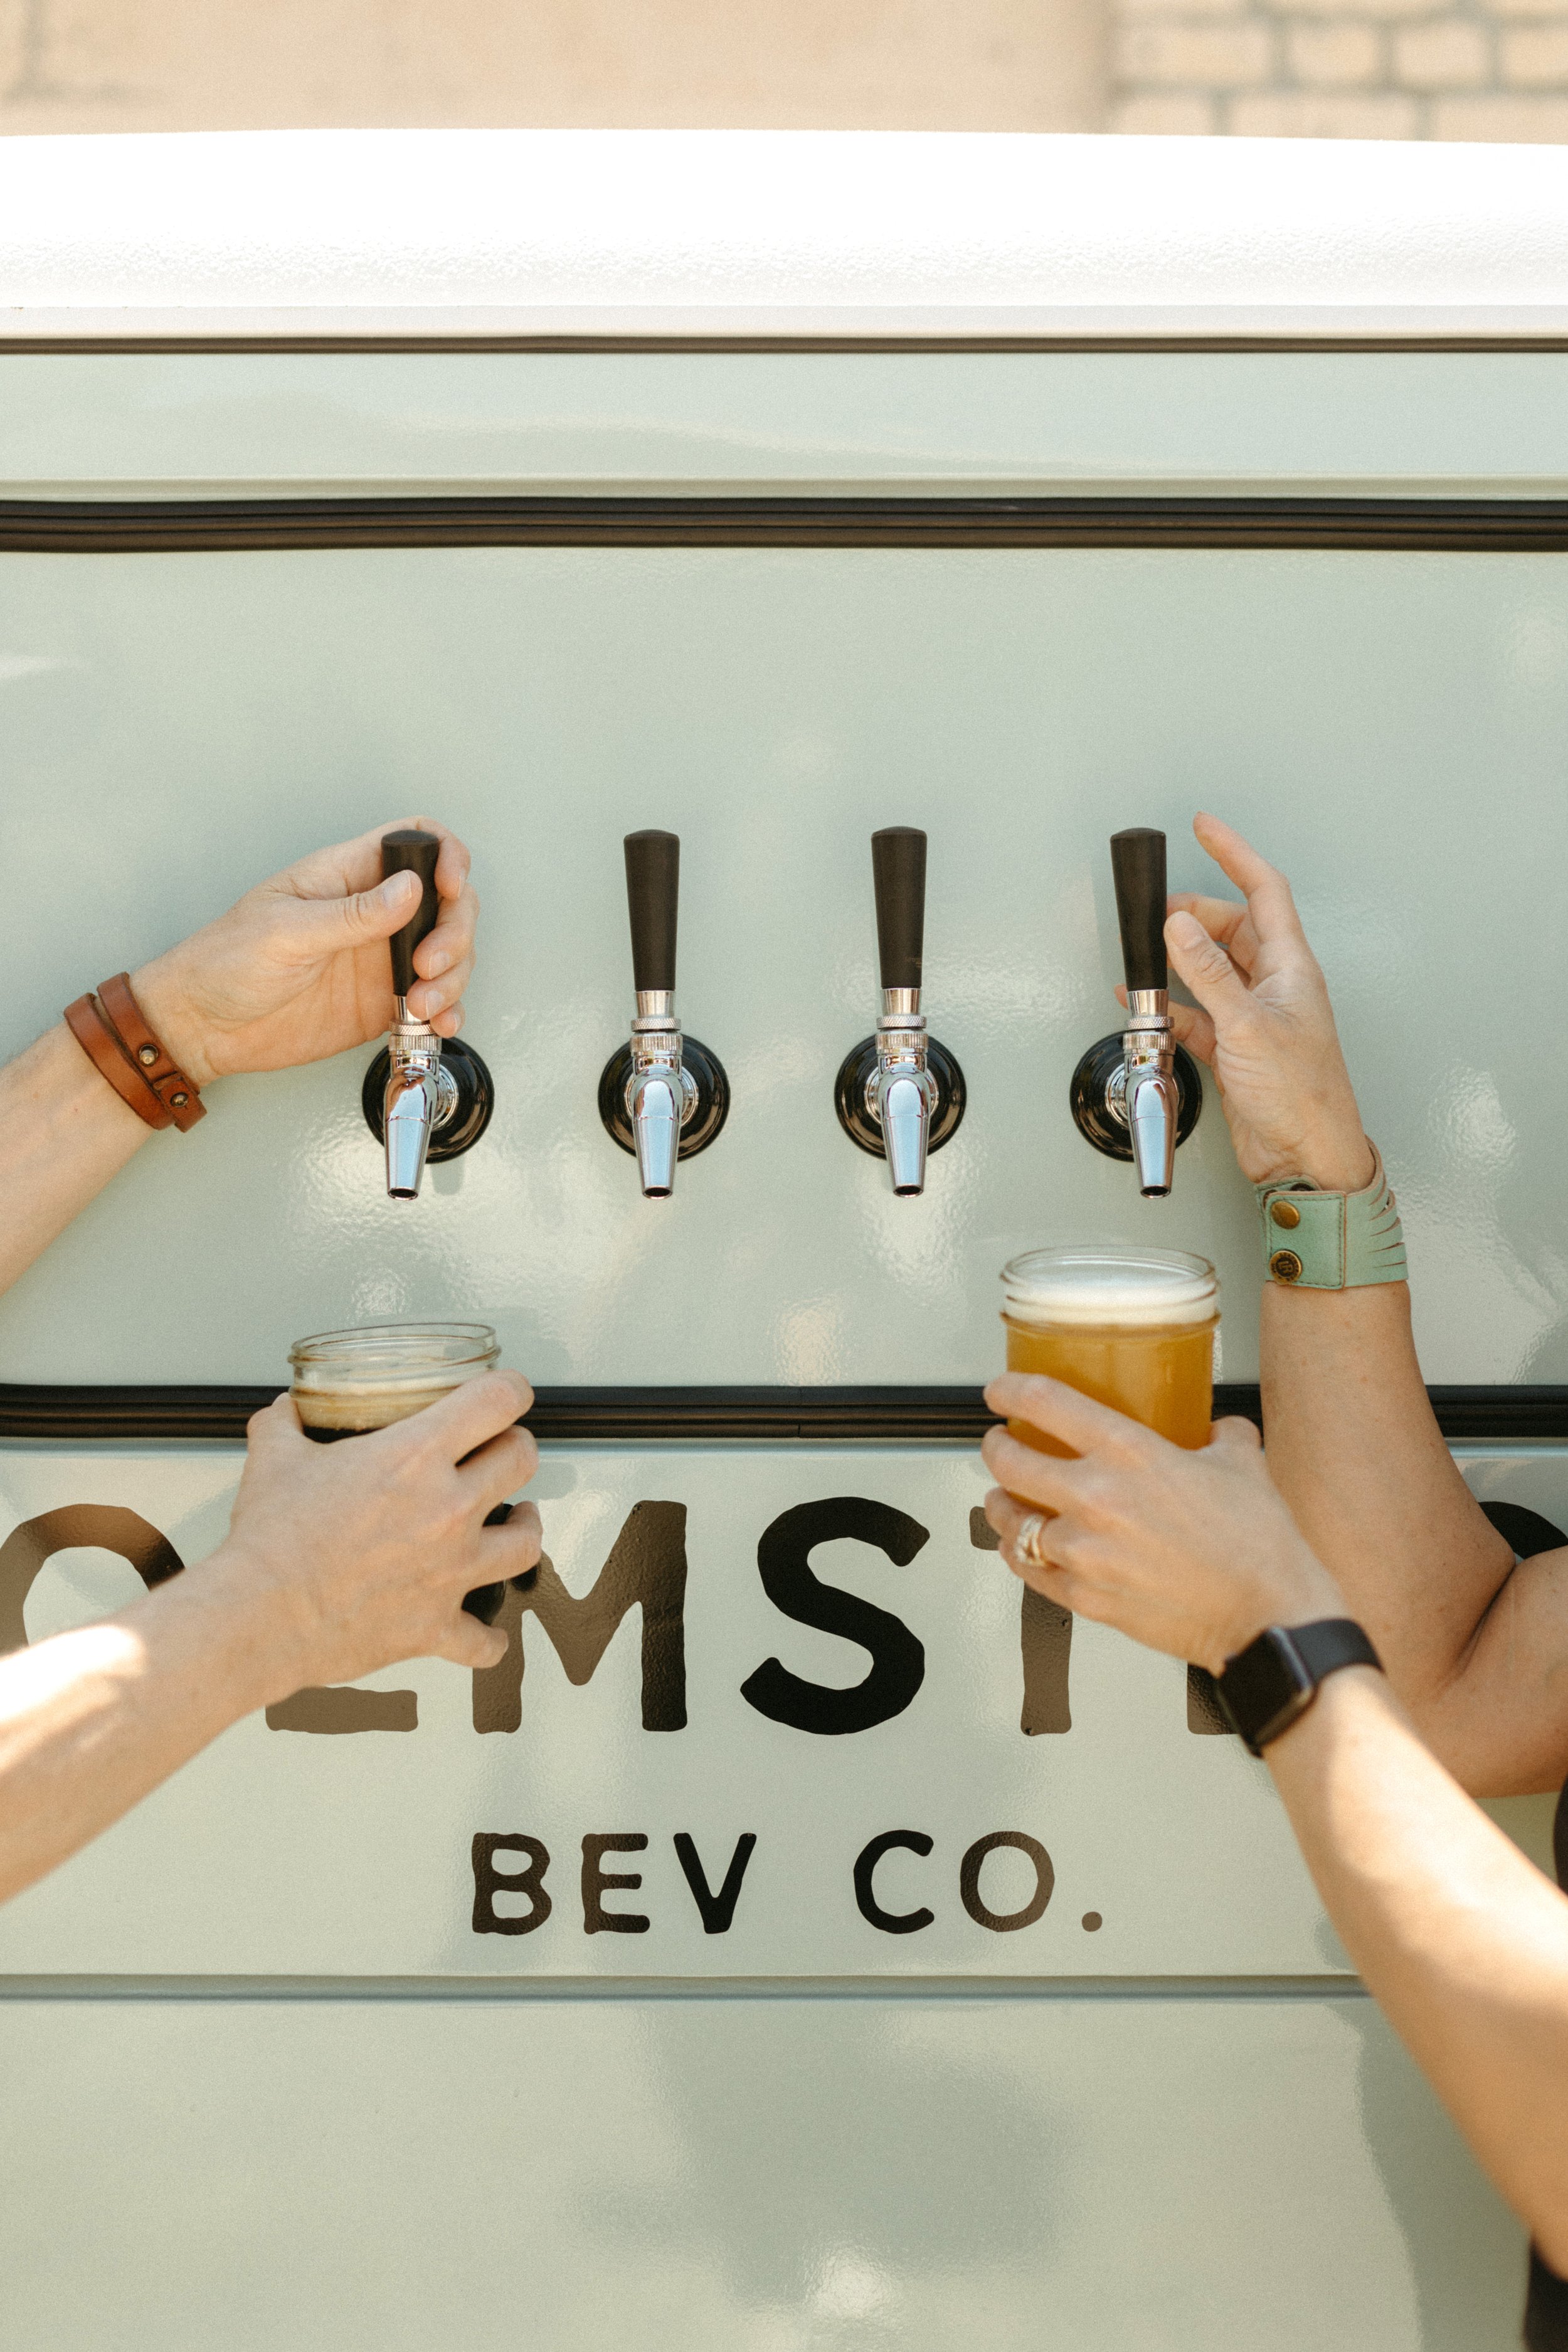 olsted-tap-truck-branding-session-knoxville-tori-lynne-photography-101.jpg